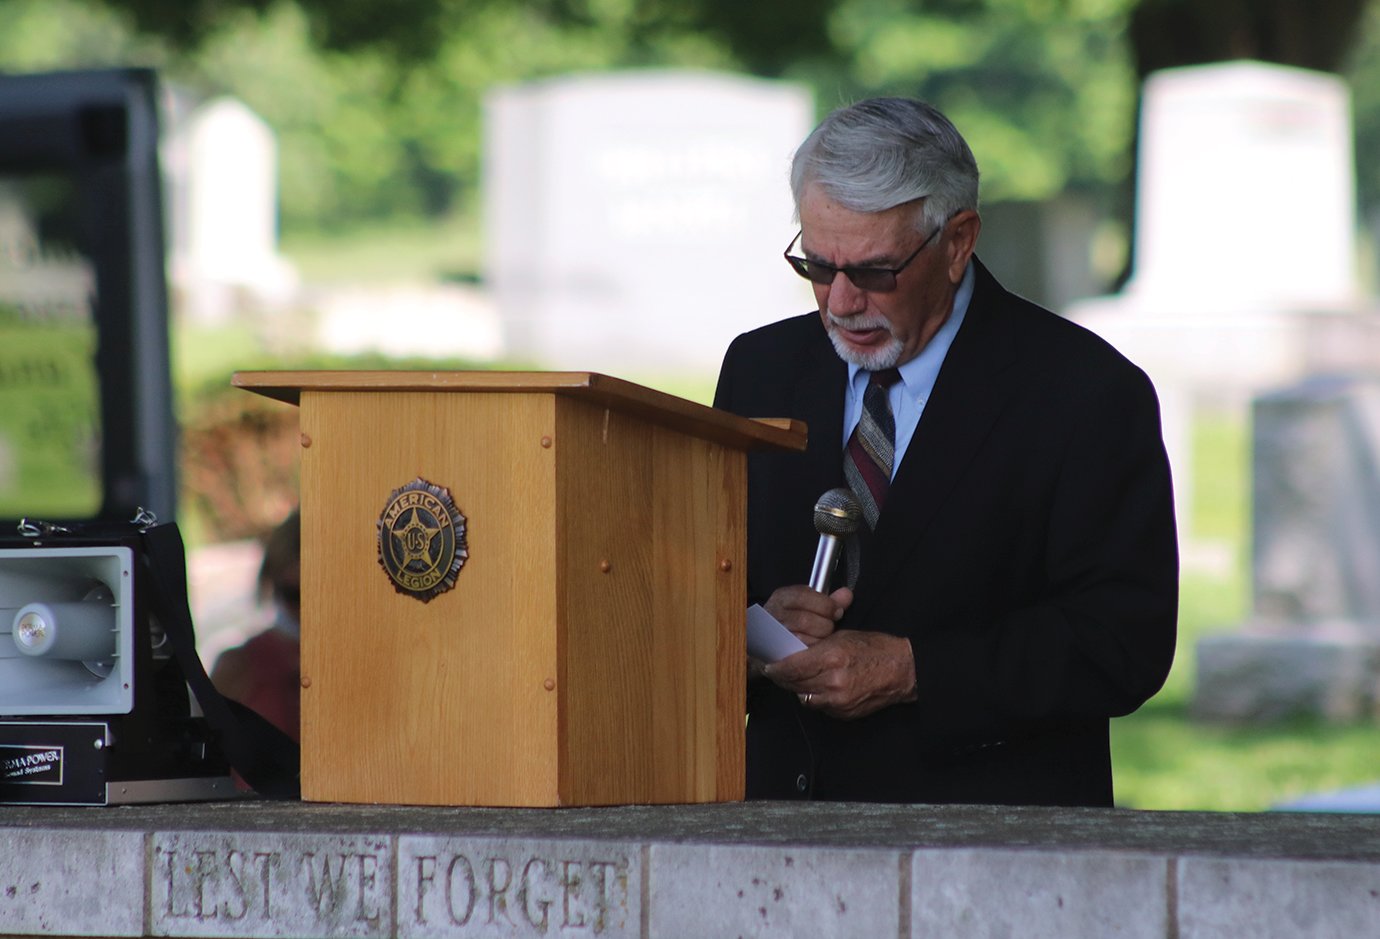 Reverend Mike Whitaker, former pastor of Whitesville Christian and New Hope Christian churches, delivers the opening prayer and later the benediction at Oak Hill Cemetery during services on Memorial Day.